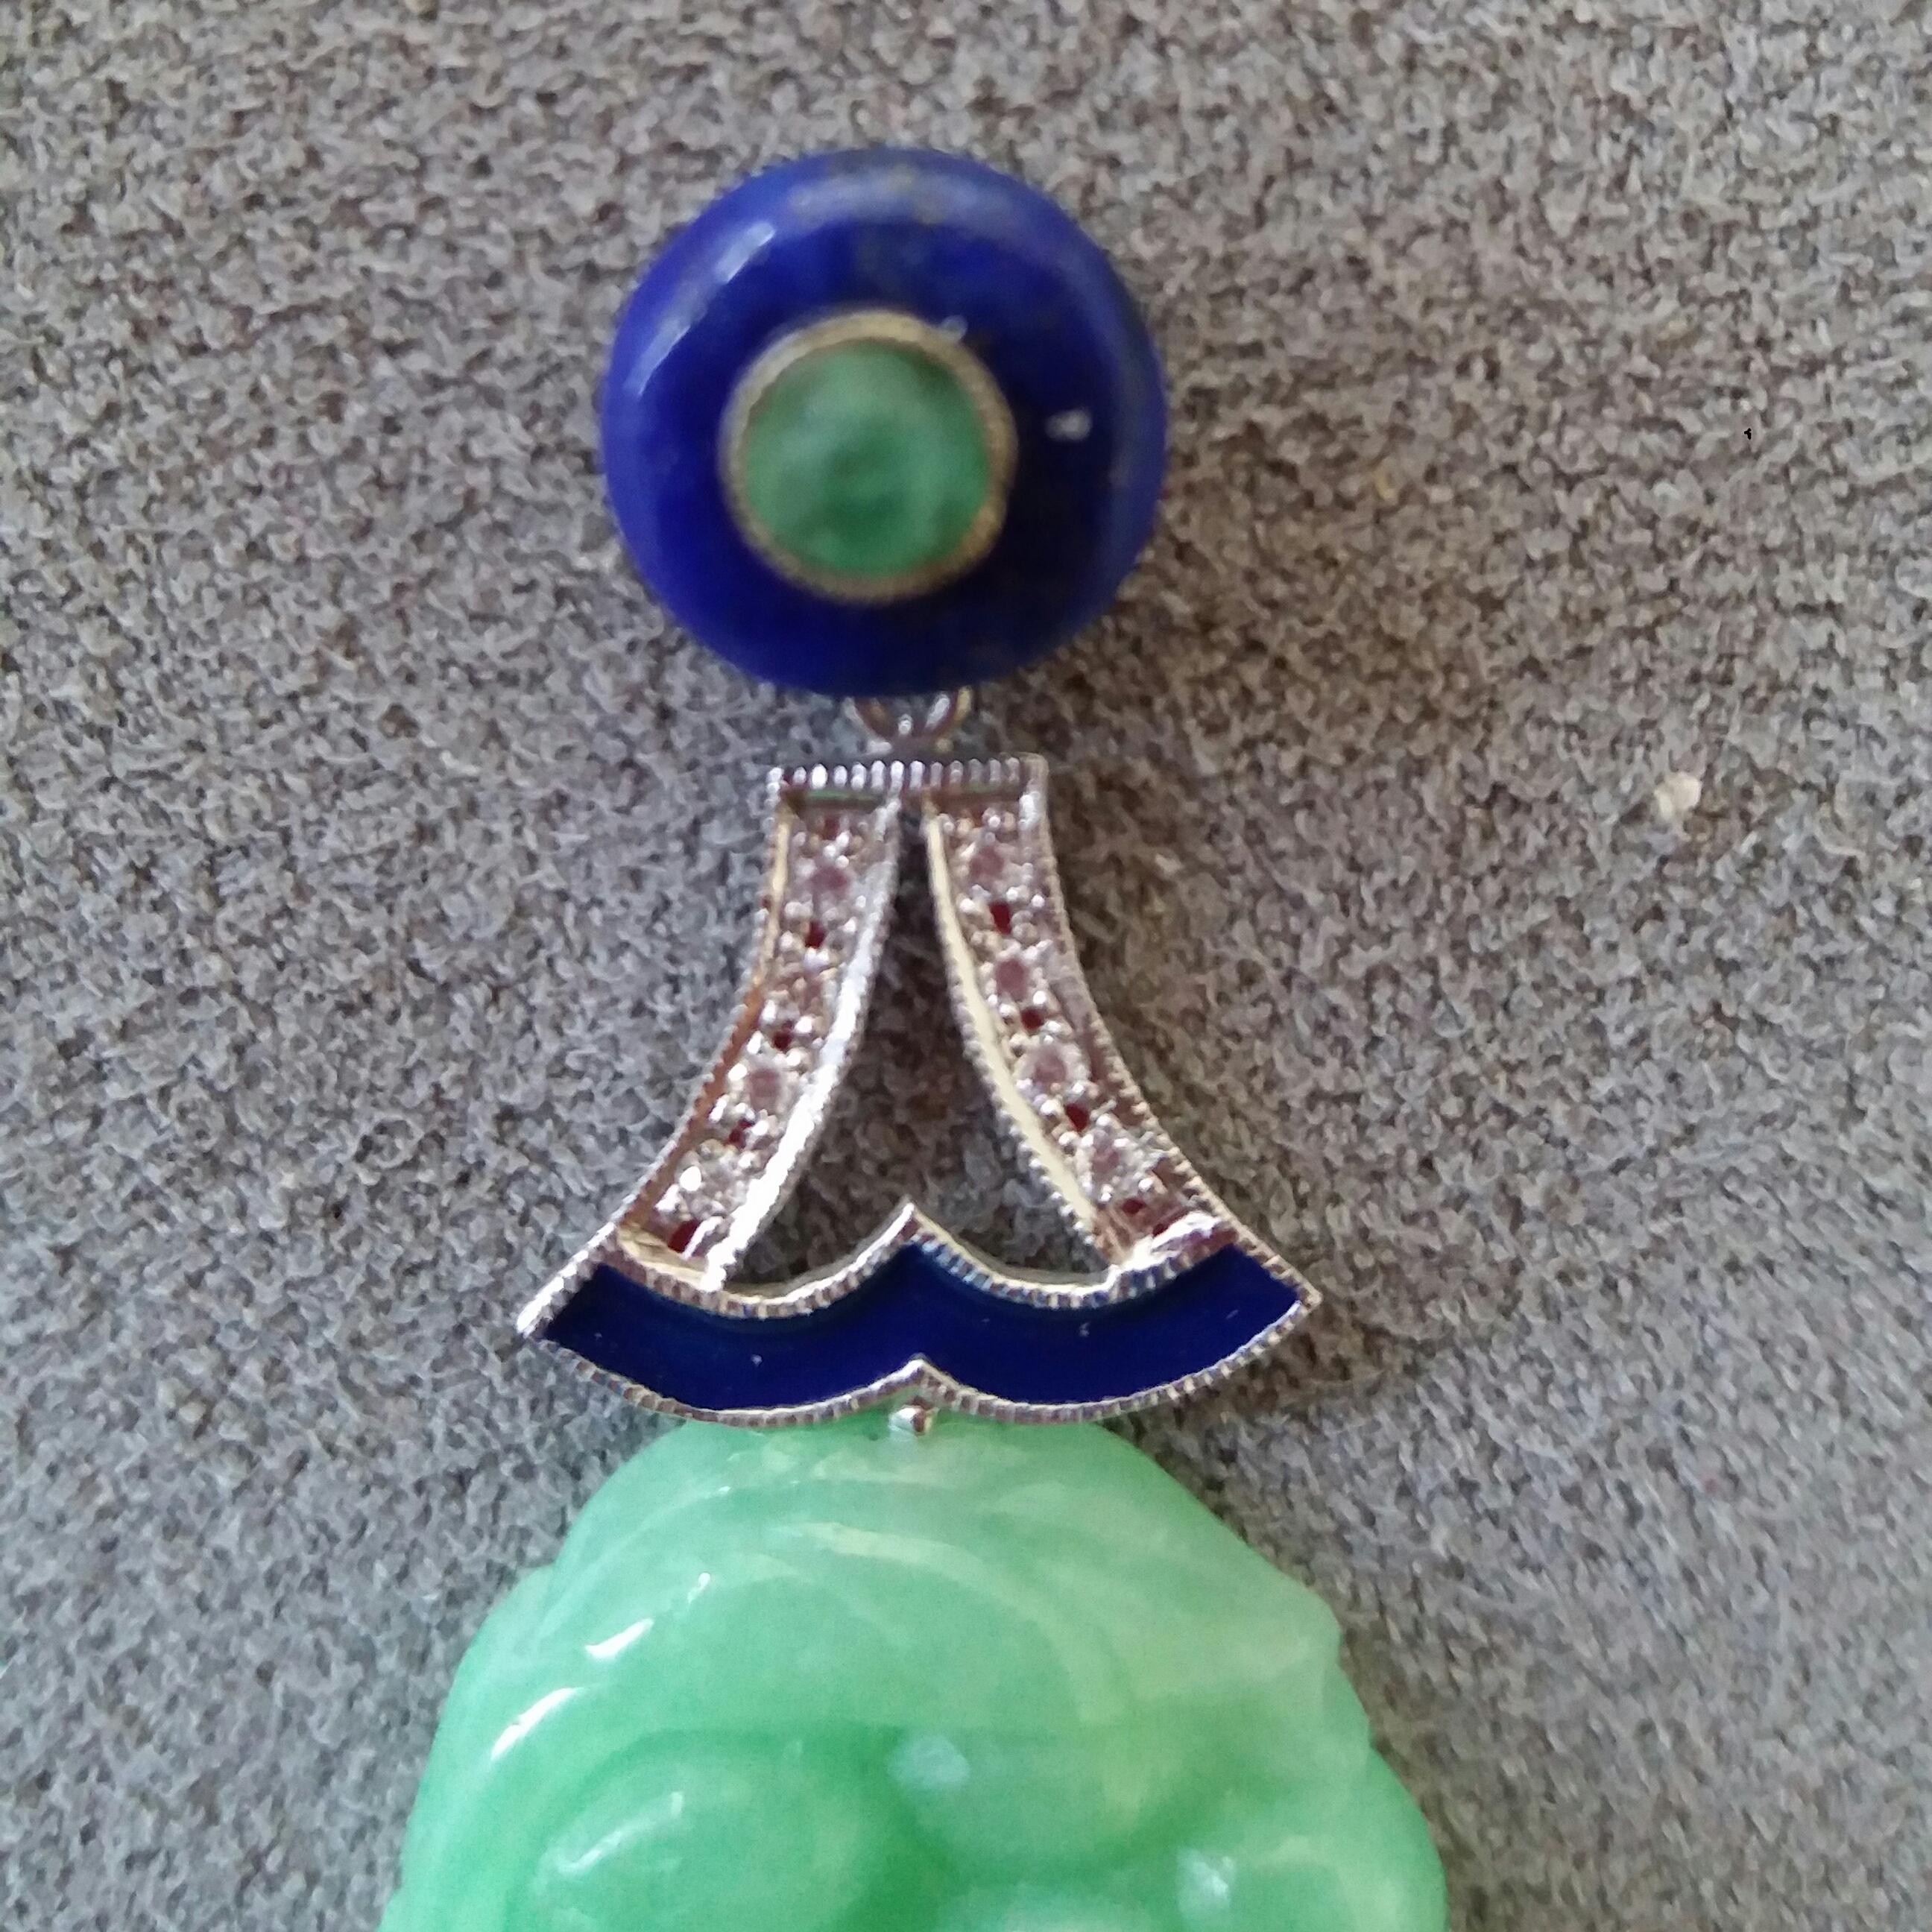 Tops are 2 round Lapis Lazuli buttons with a small round emerald cabochon in the center , middle parts in white gold,small full cut round diamonds  and blue enamel , bottom parts are 2  Burma Jades carved in floreal patters.
In 1978 our workshop